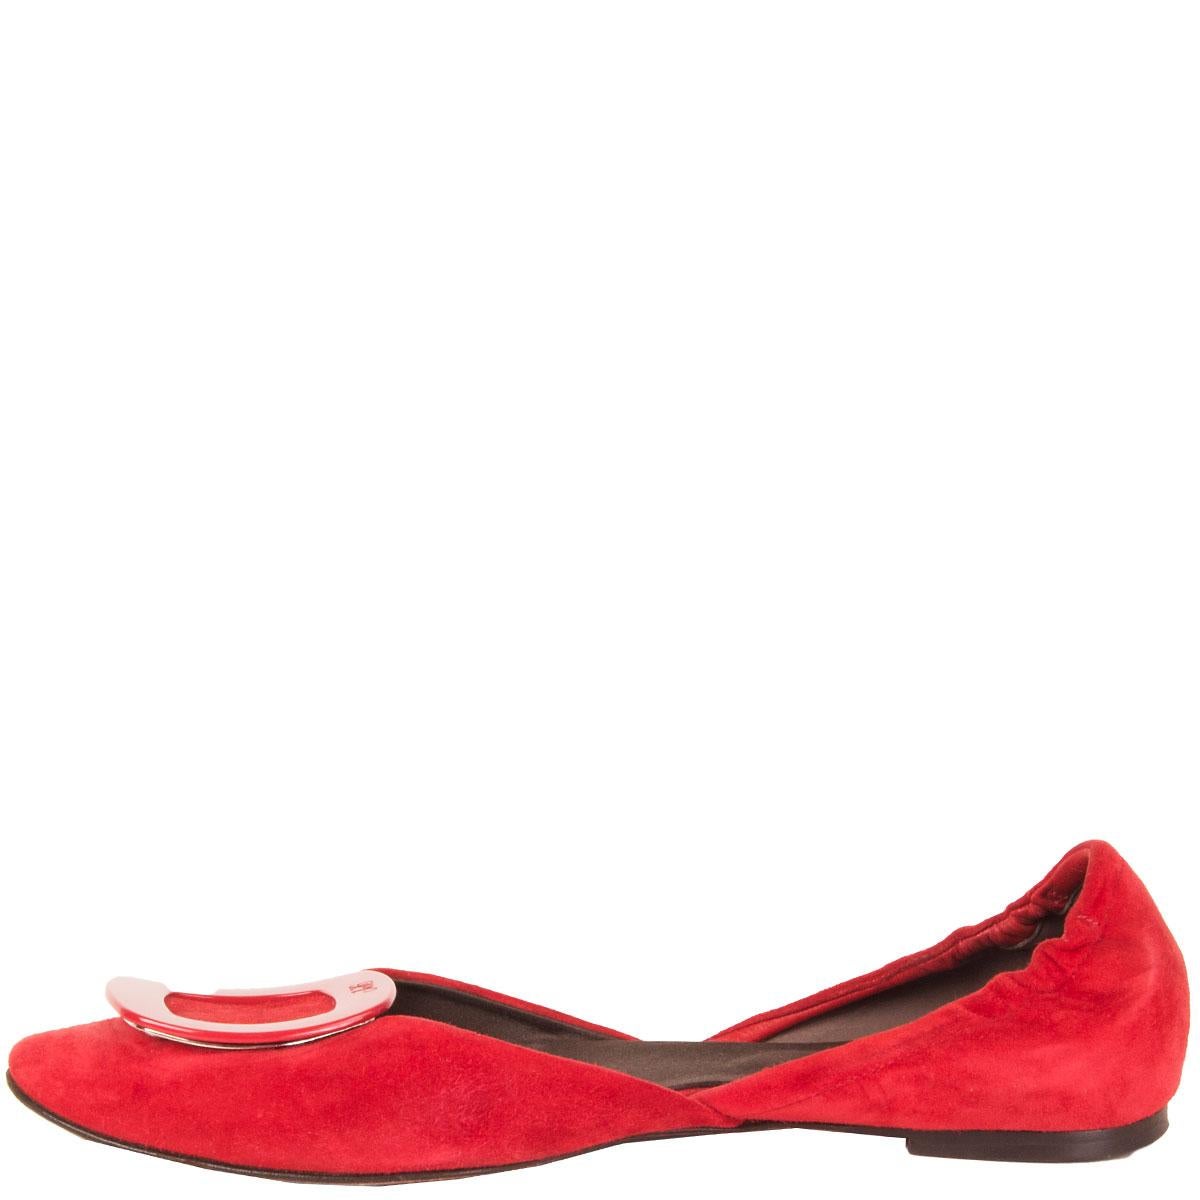 red suede ballet flats